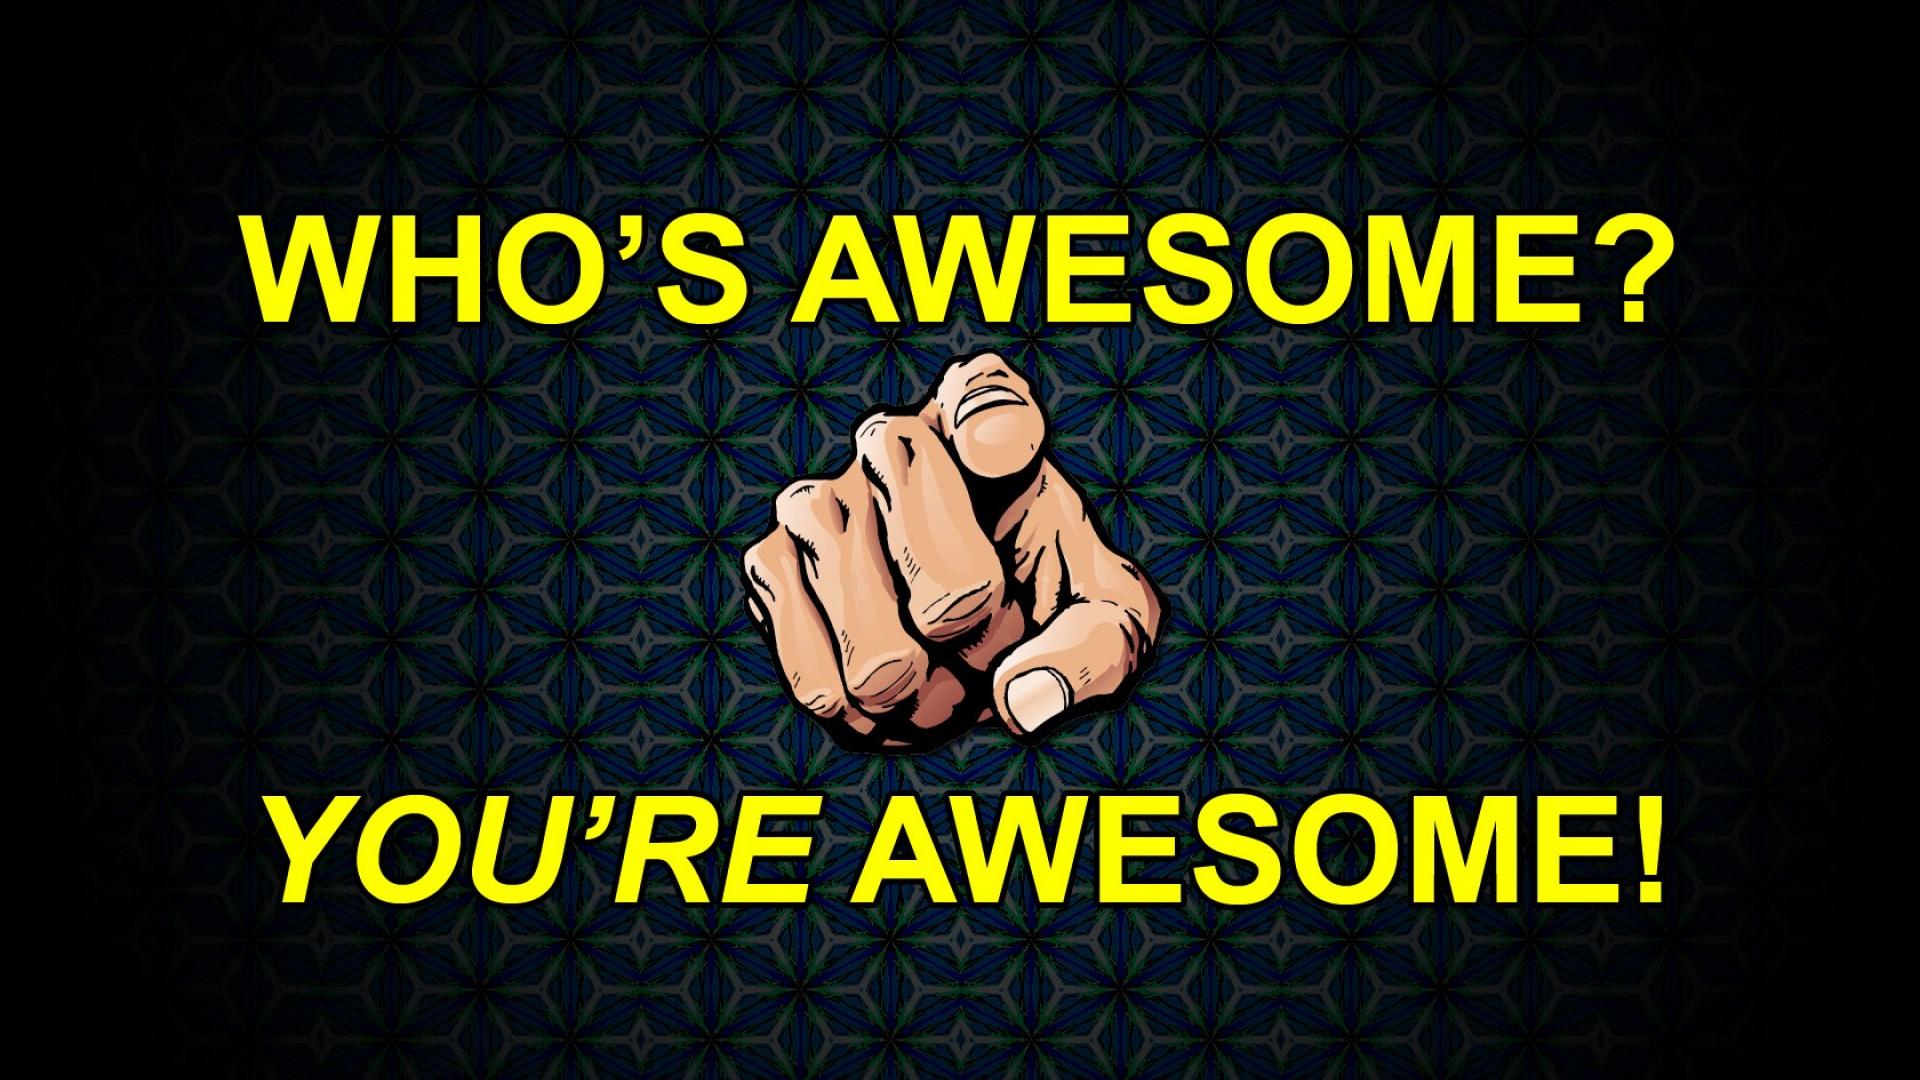 You are awesome wallpaper 1680x1050 - (#25110) - High Quality and ...